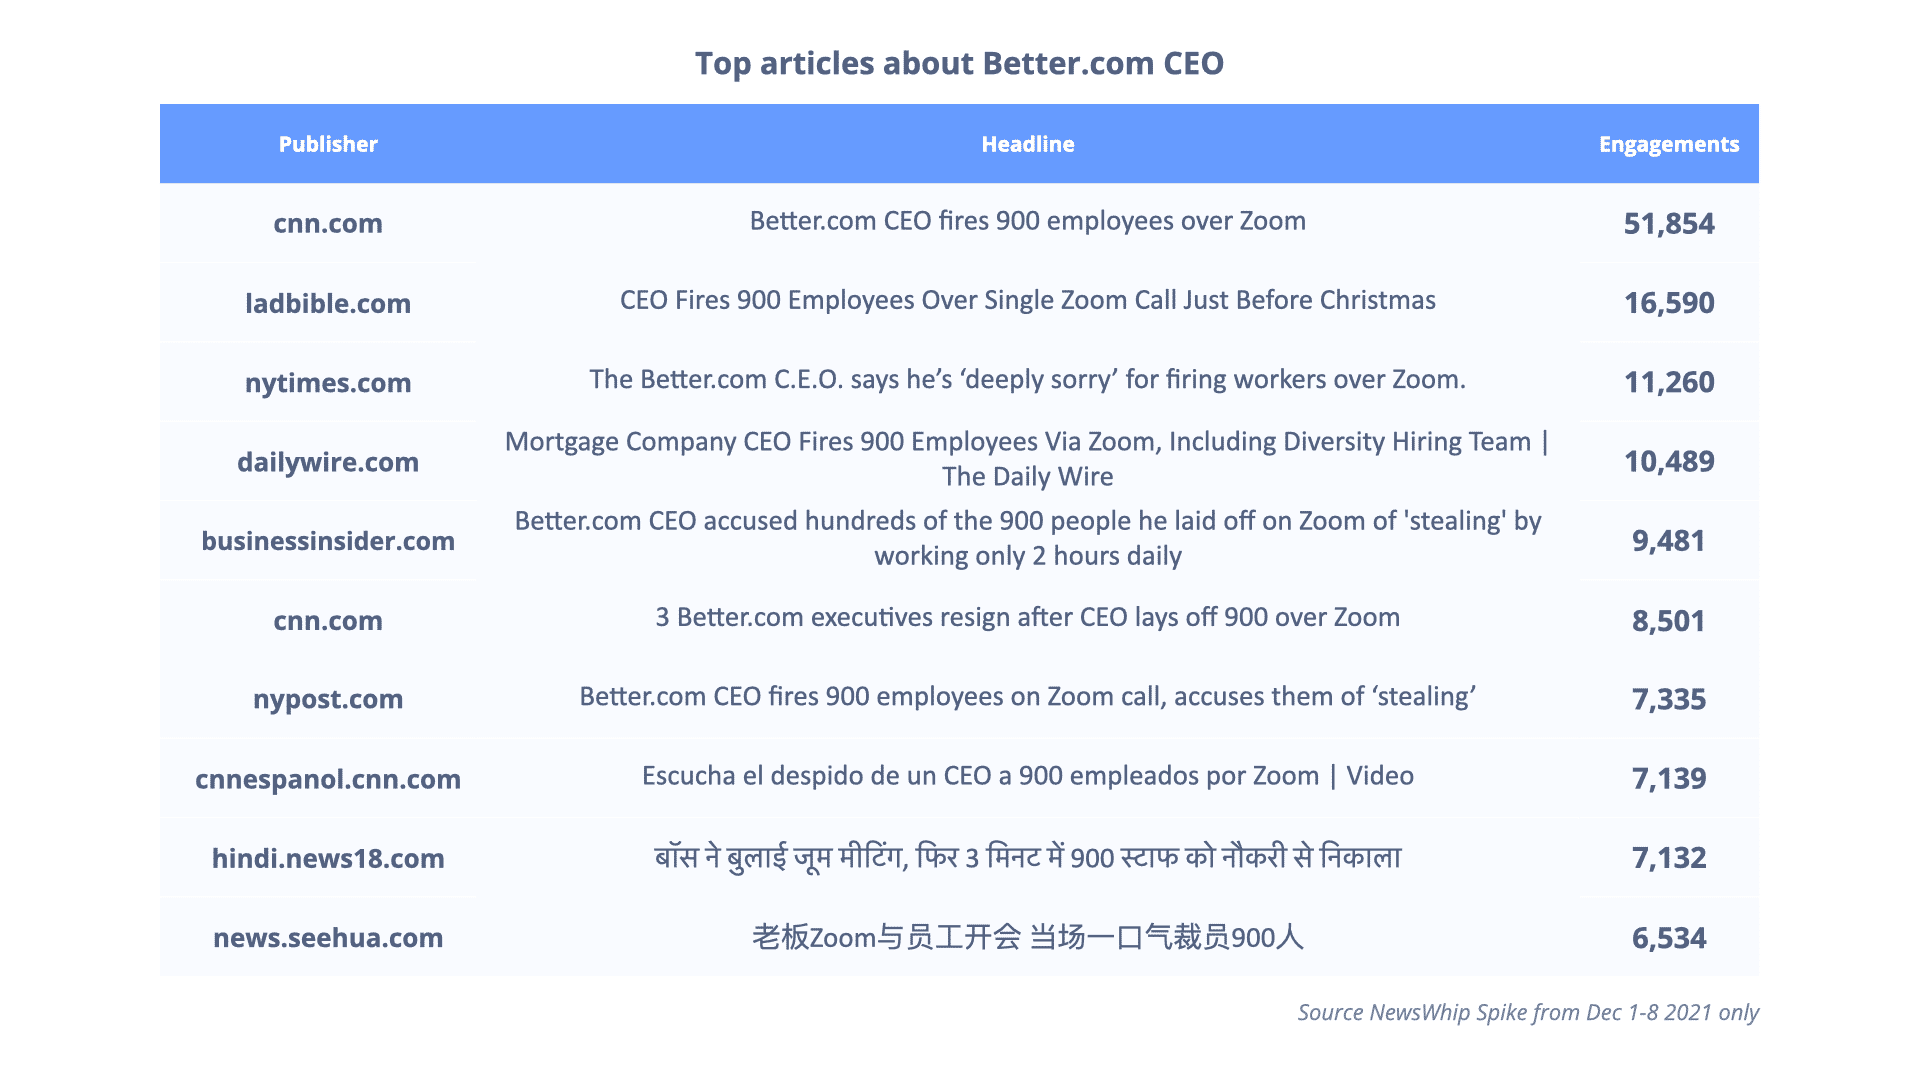 Chart showing top articles to Better.com CEO